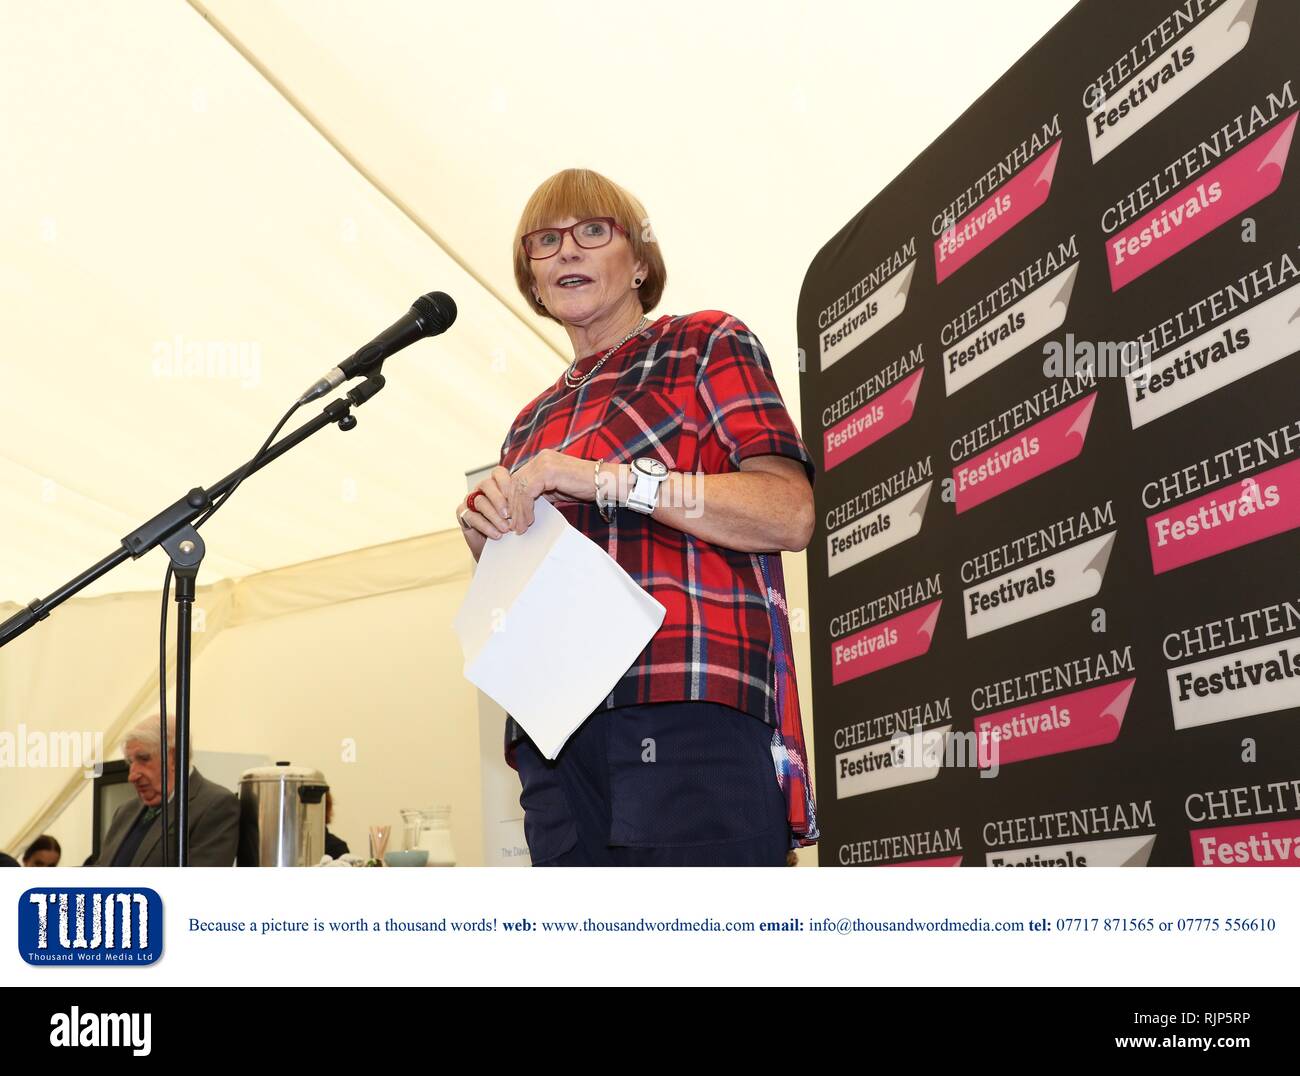 The David Vaisey Prize for Libraries Presentation with Alan Bennett at The Cheltenham Literature Festival - Anne Robinson    -  Sunday 8th of October  Stock Photo